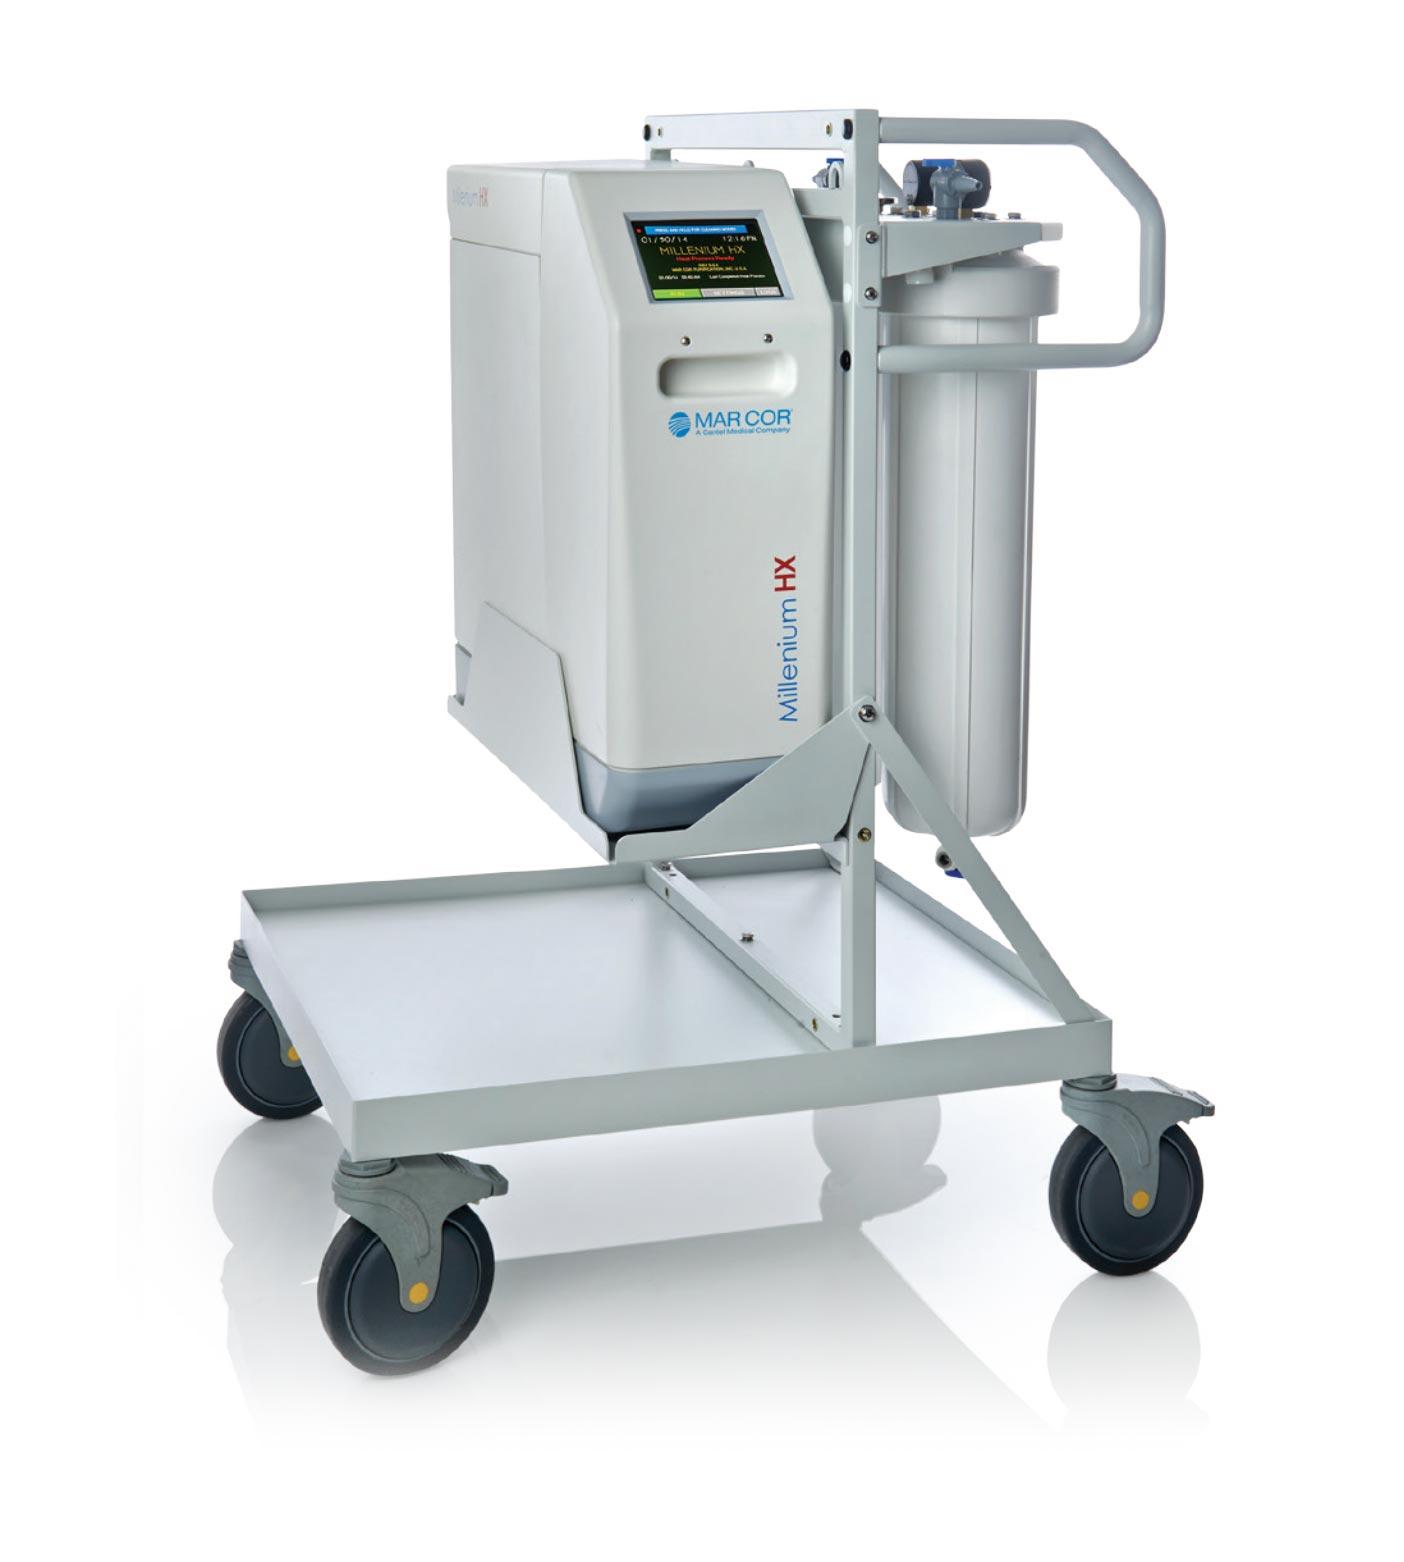 Product PTG-520 Carbon Block System - Mar Cor | Water, Filtration, & Disinfection Technologies image